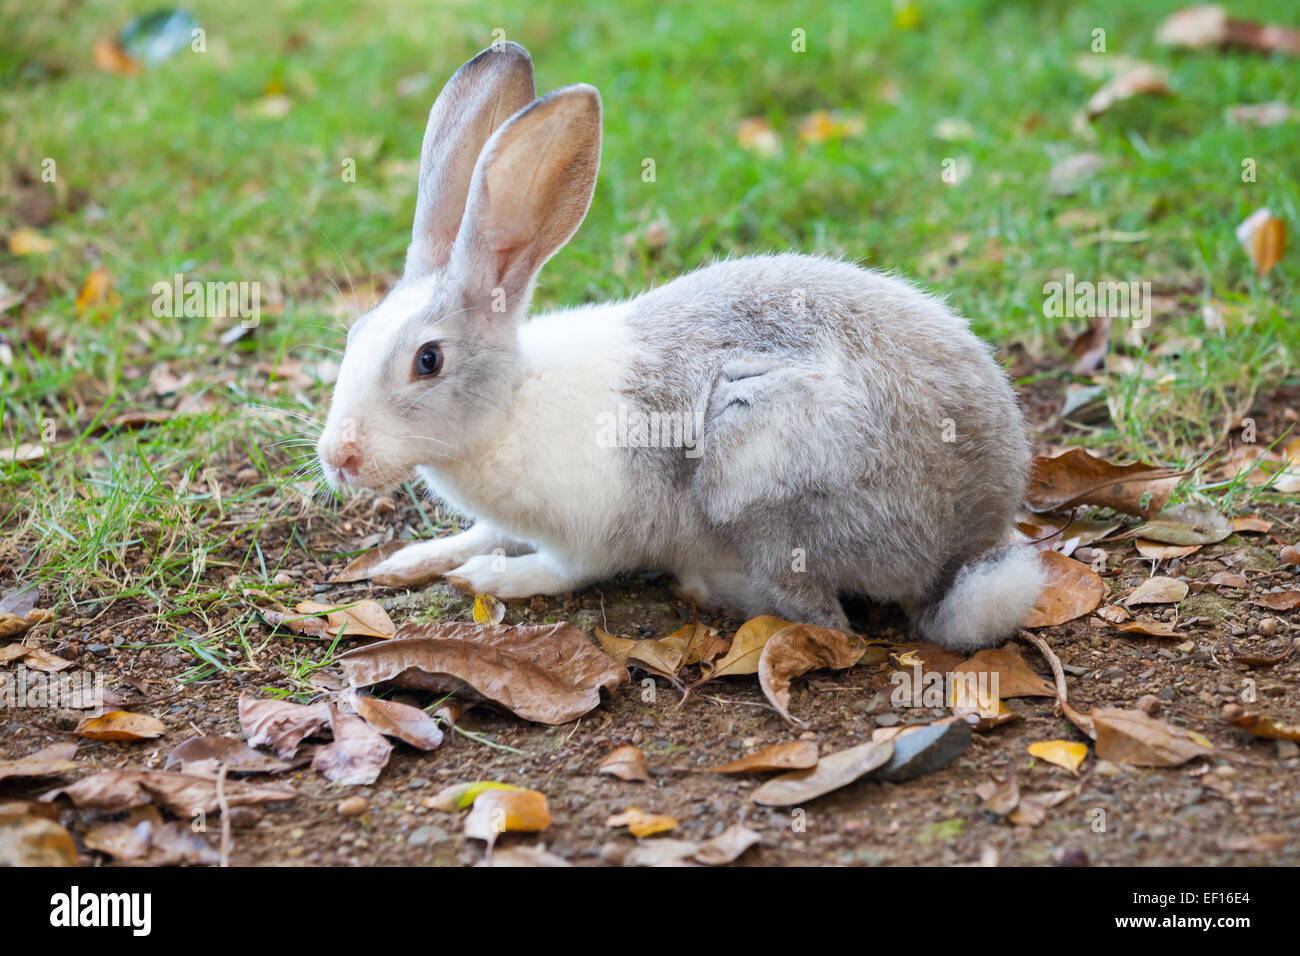 Gray and white rabbit sitting on green grass Stock Photo